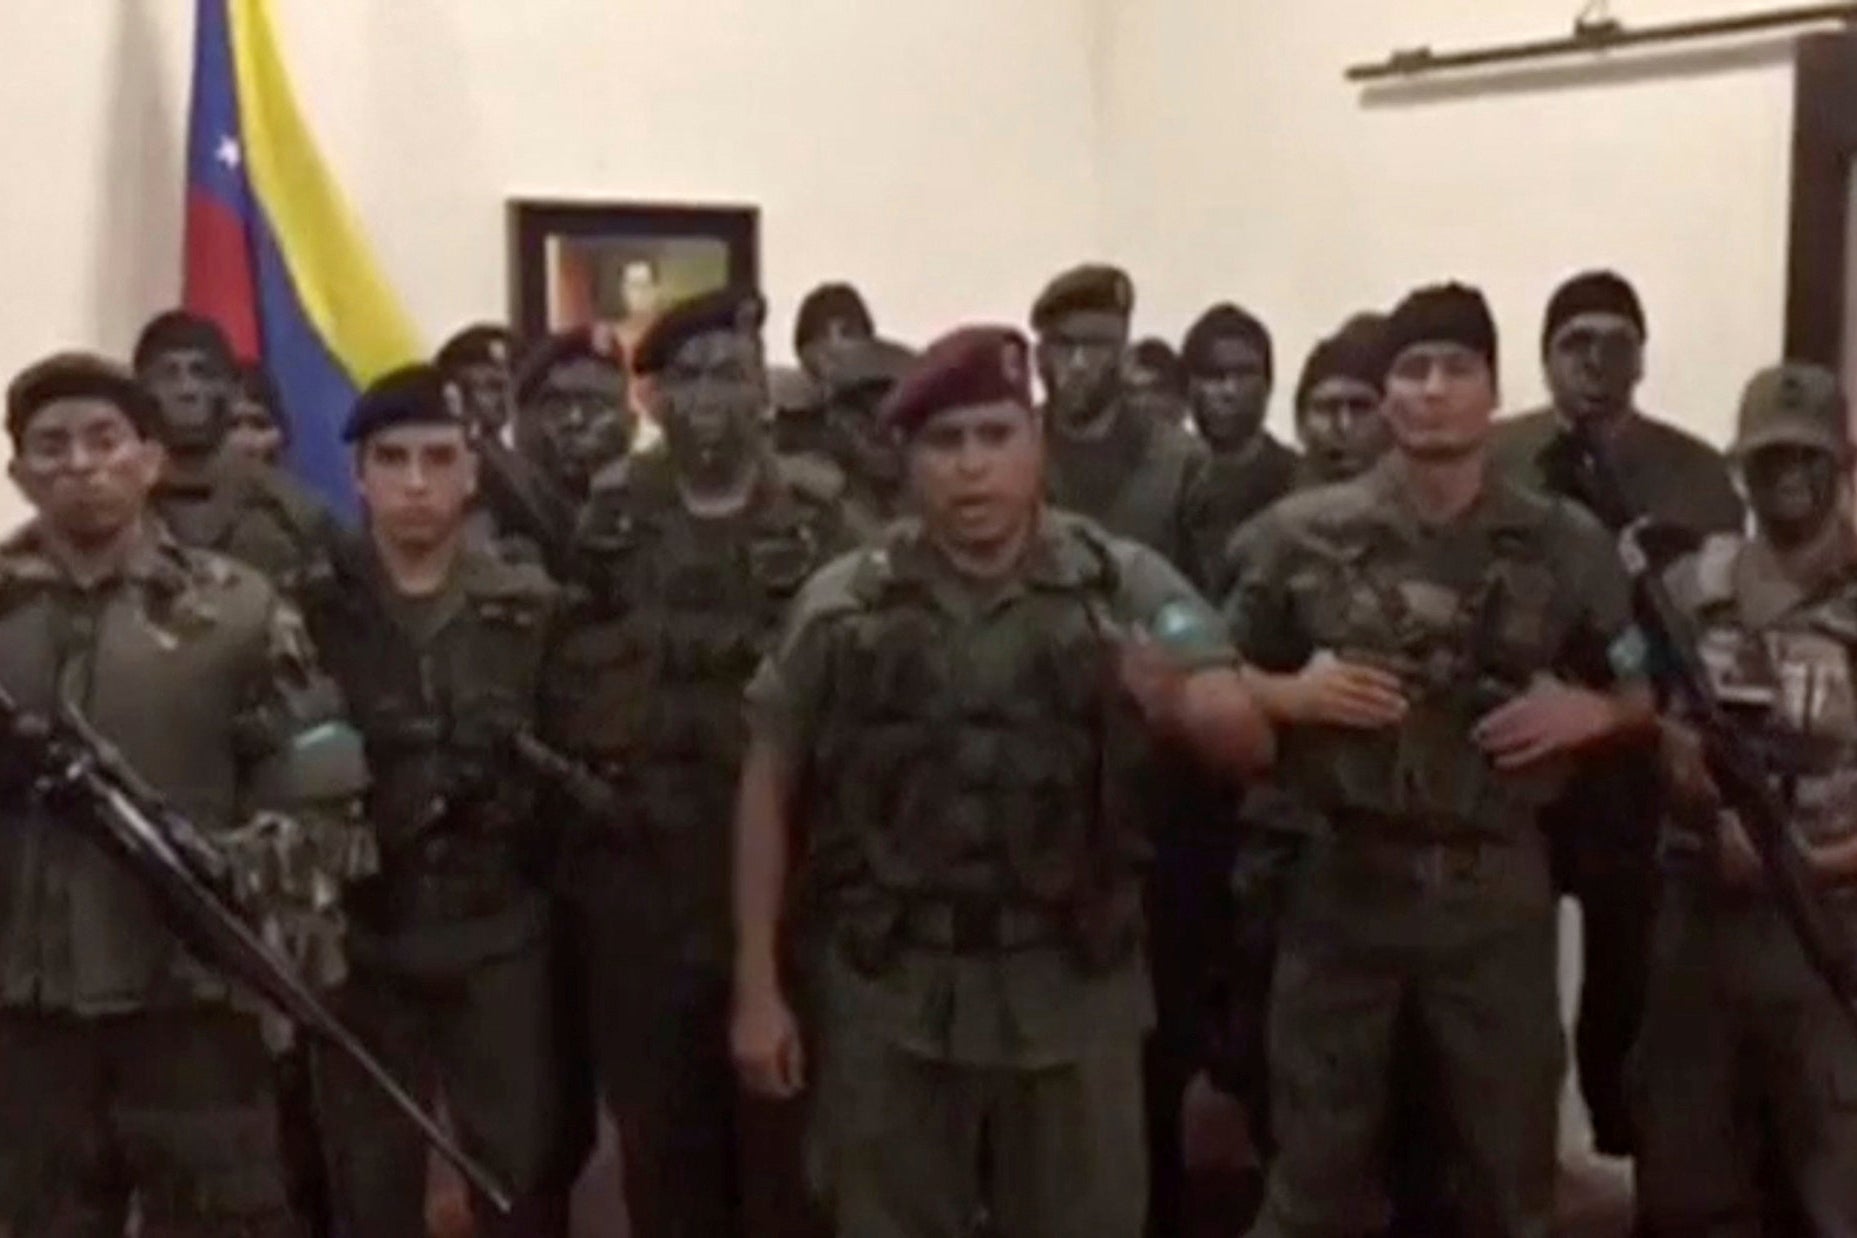 A still image from video released by Operation David Carabobo purportedly shows a group of men dressed in military uniforms announcing uprising in Valencia, Venezuela August 6, 2017.